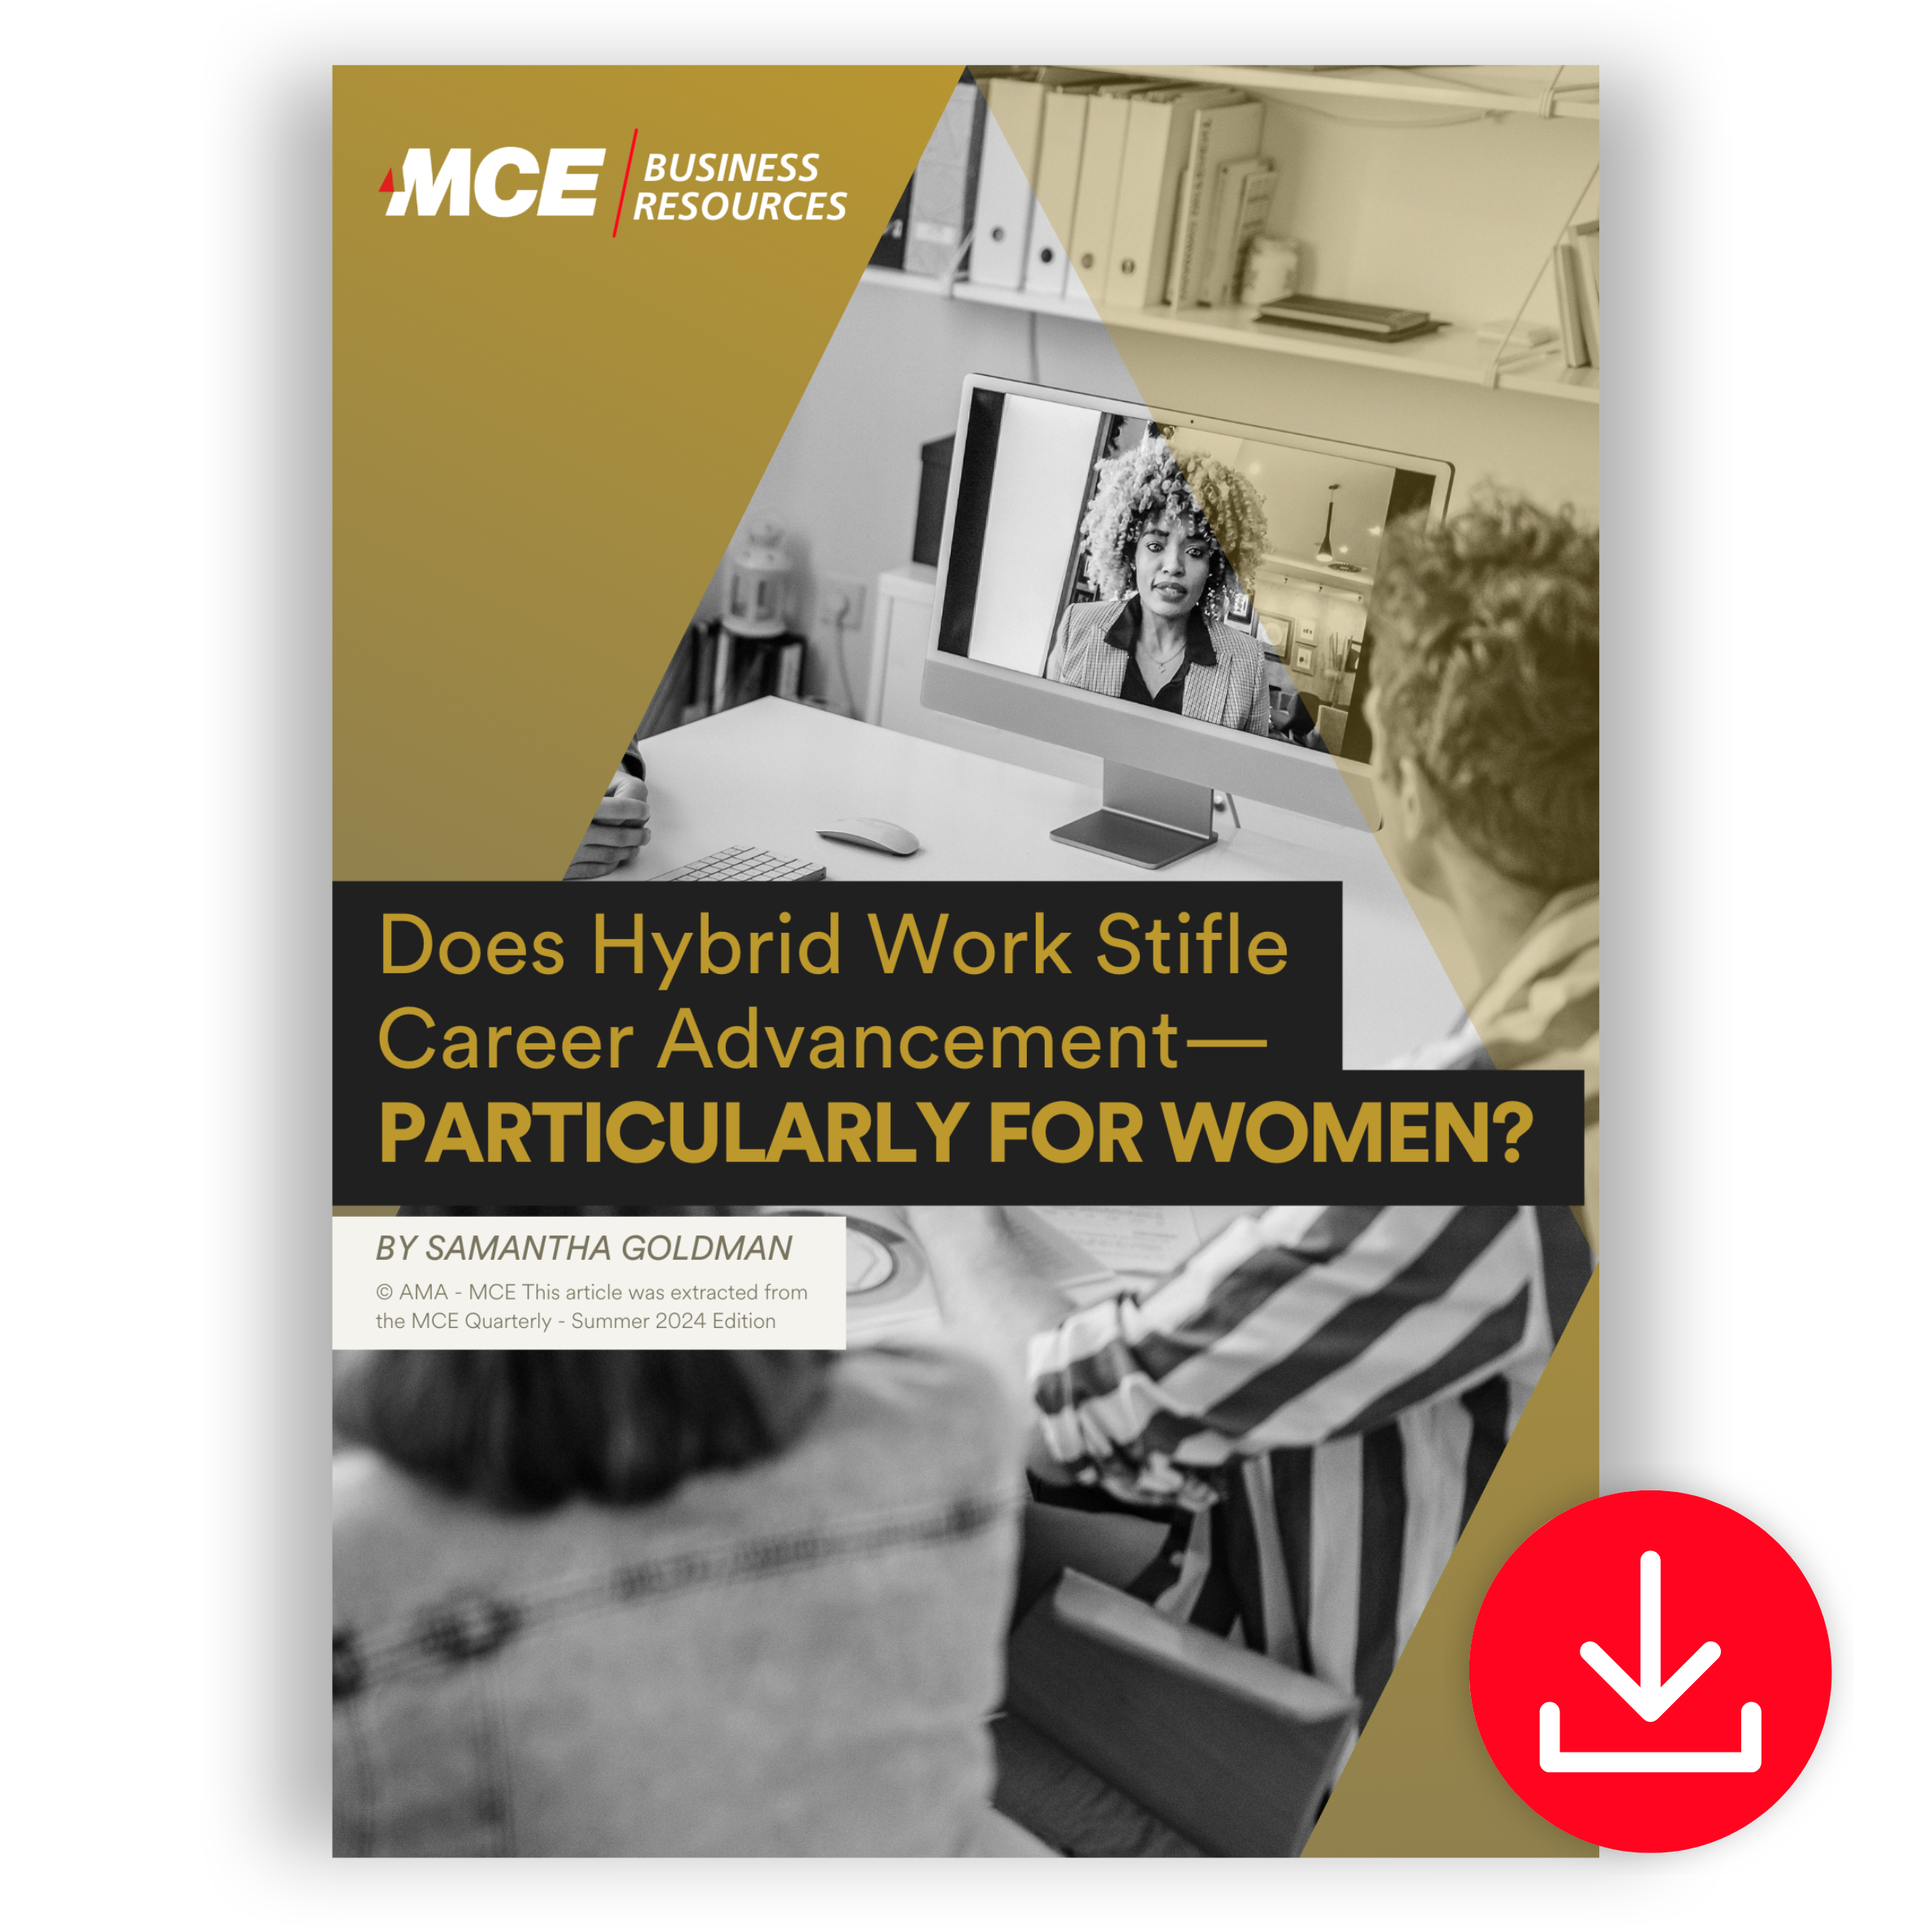 Does Hybrid Work Stifle Career Advancement—PARTICULARLY FOR WOMEN?